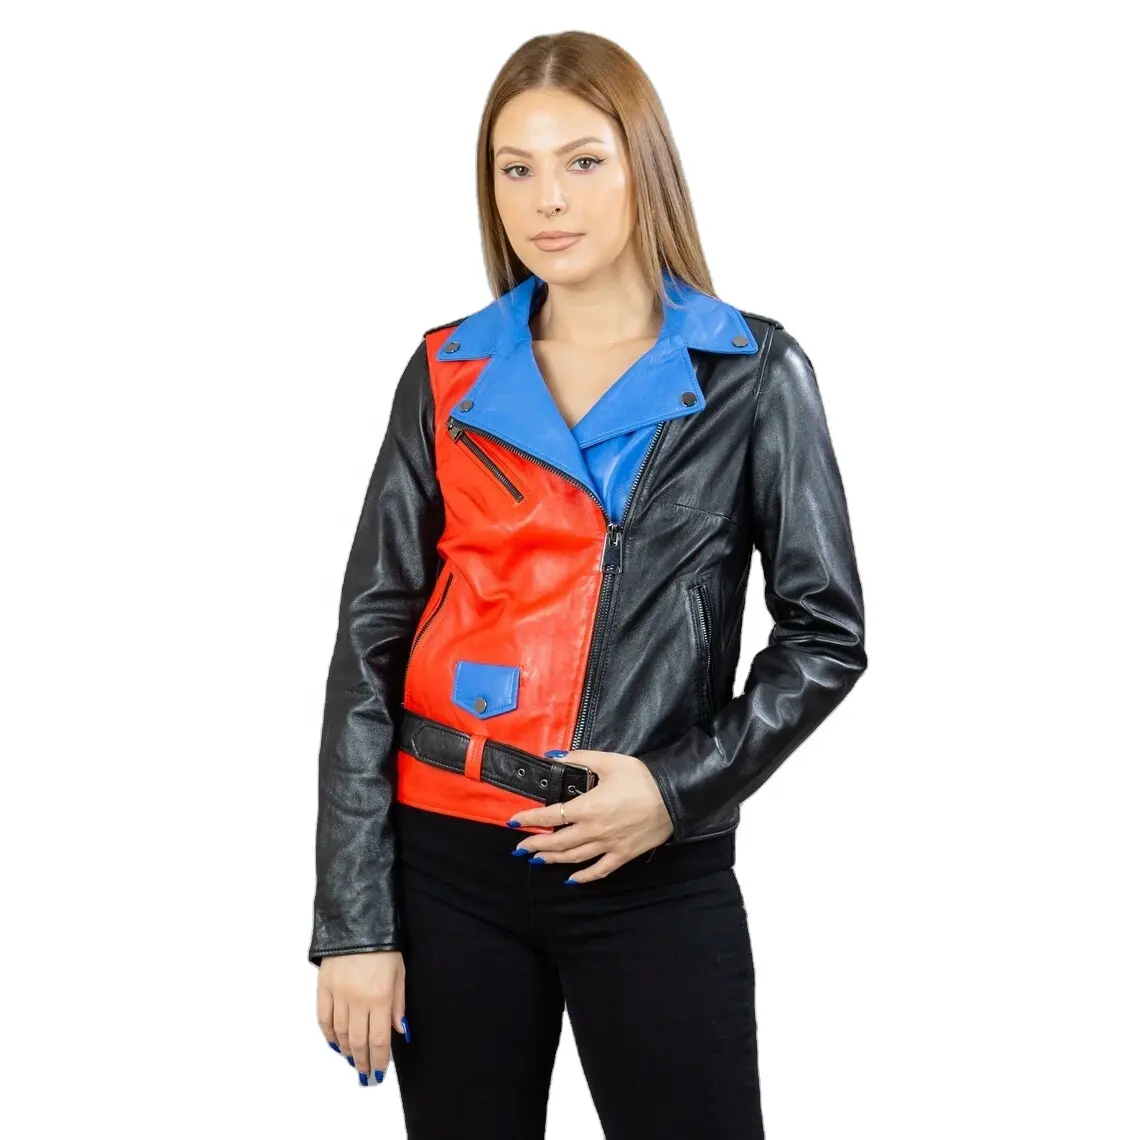 Customized High Quality Black Leather Women's Leather Jacket With Full Sleeves Women's Fashion Wear And Moto Bike Wear Jackets